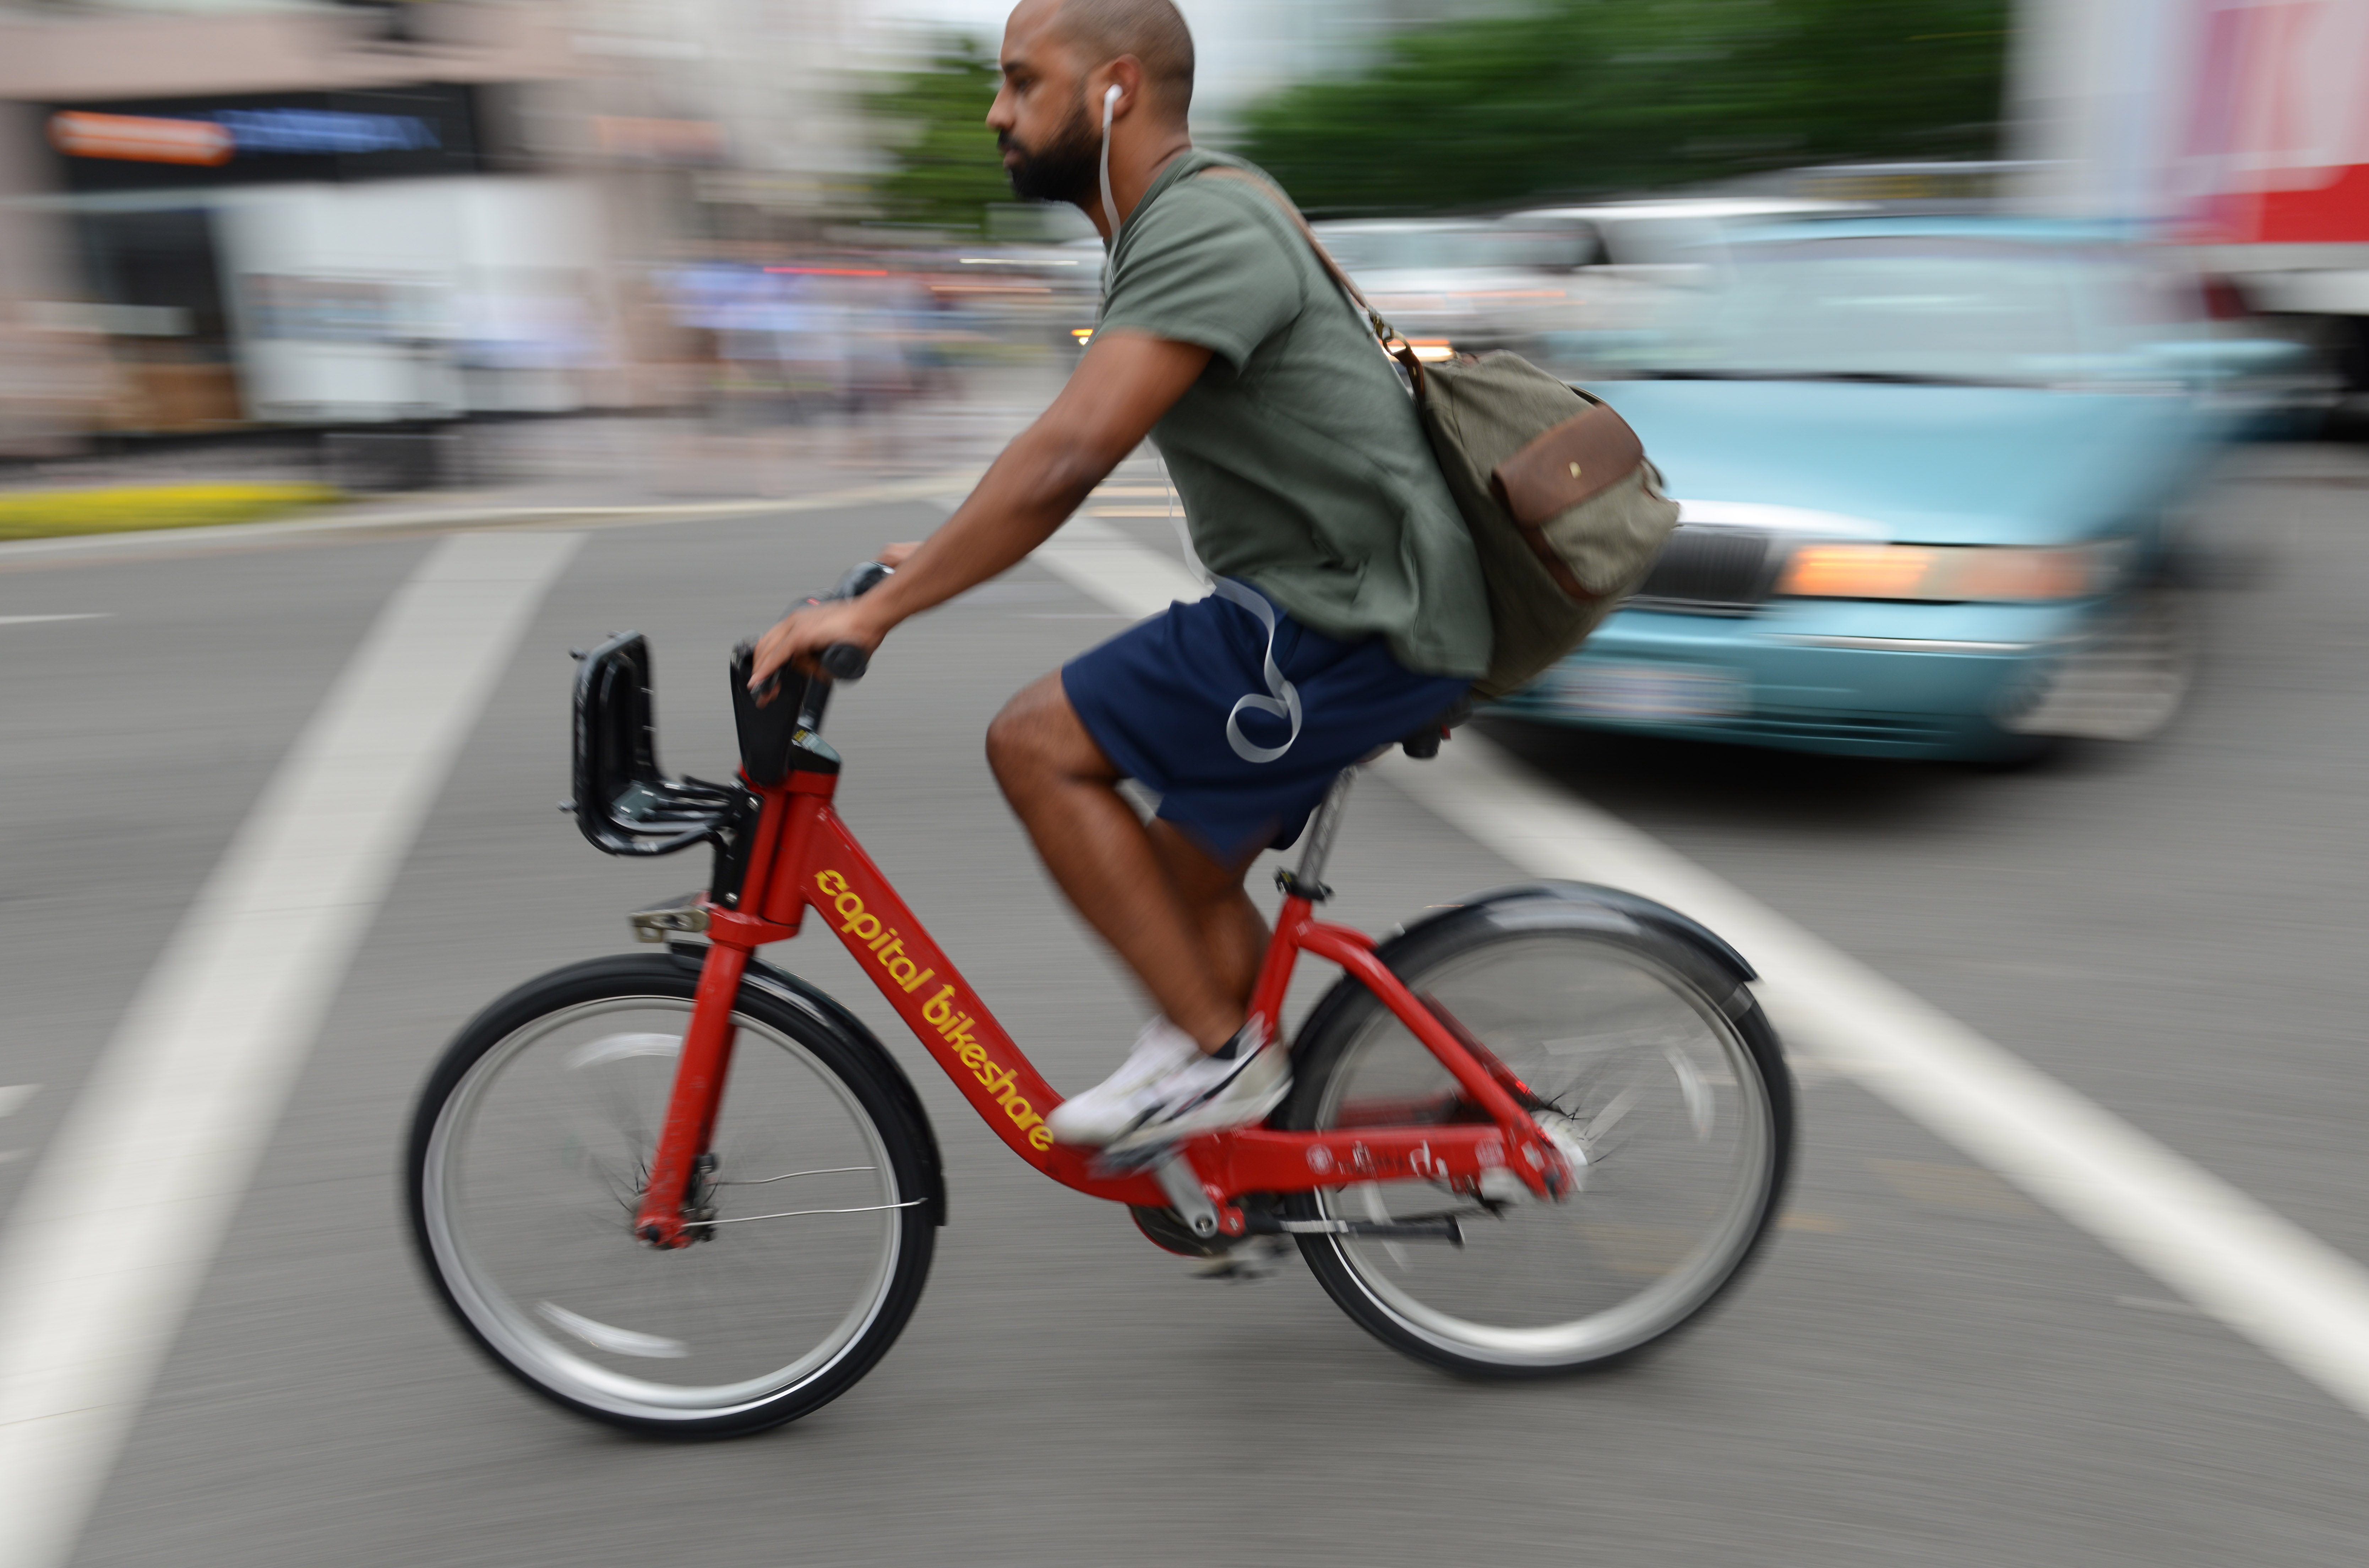 Research emerges on bike-share safety across the U.S.